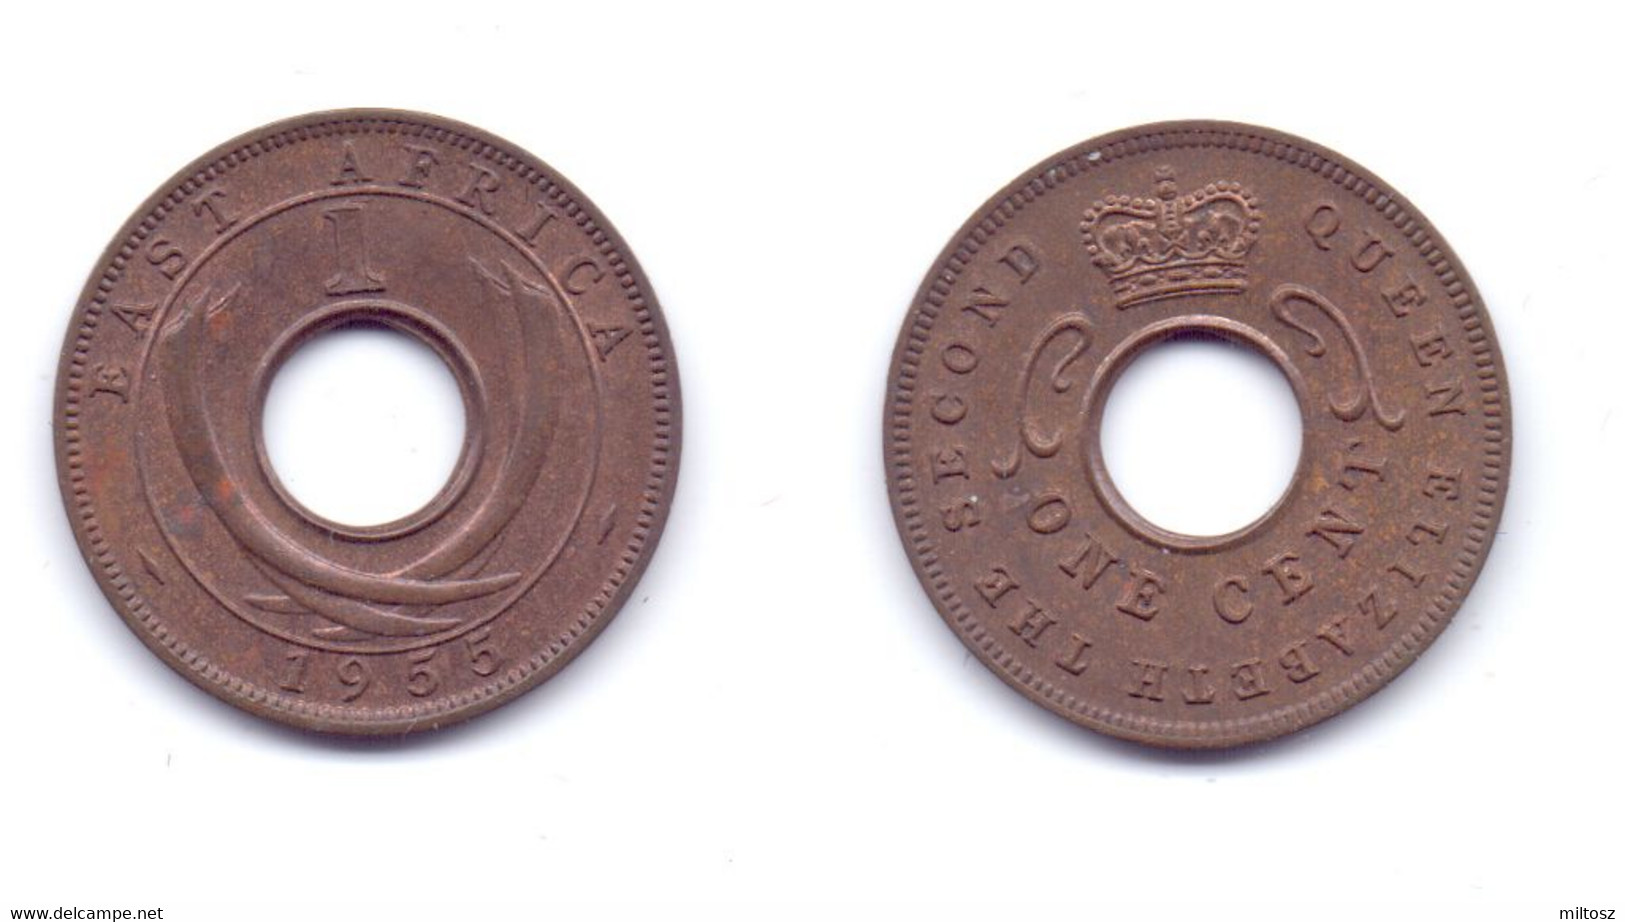 East Africa 1 Cent 1955 - Colonia Británica